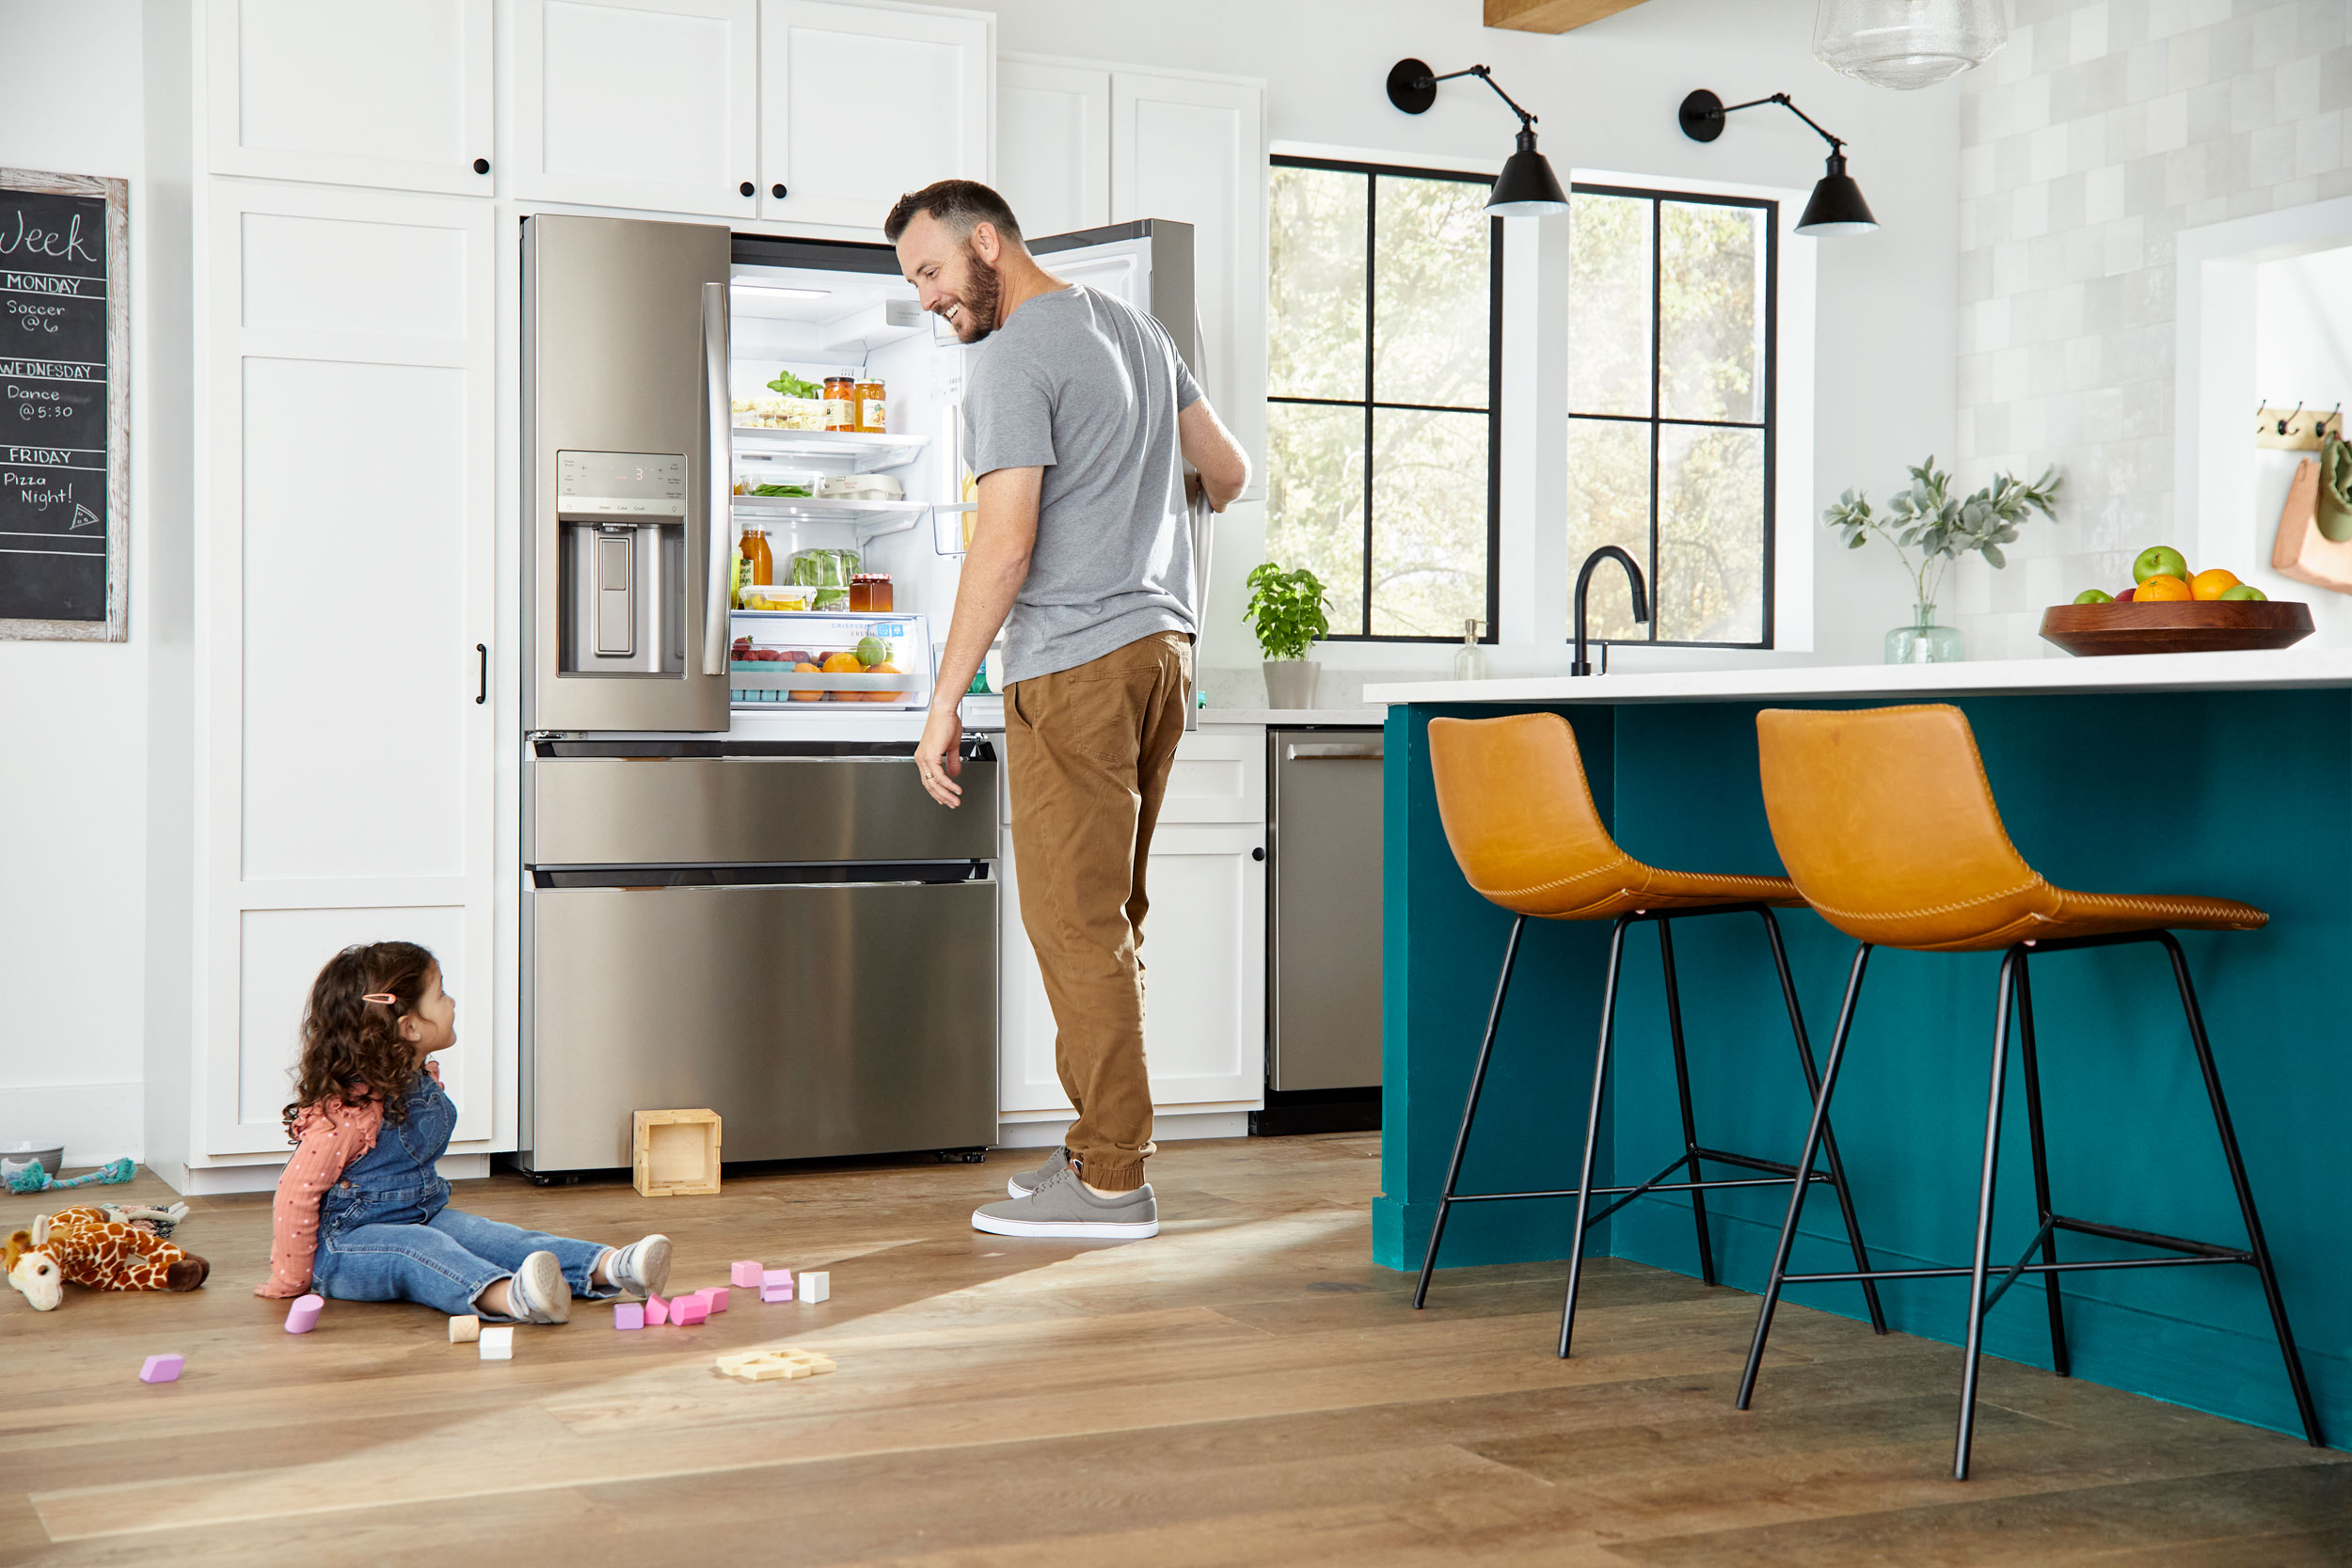 Home lifestyle: A father checks a refrigerator while his young daughter plays on the floor.